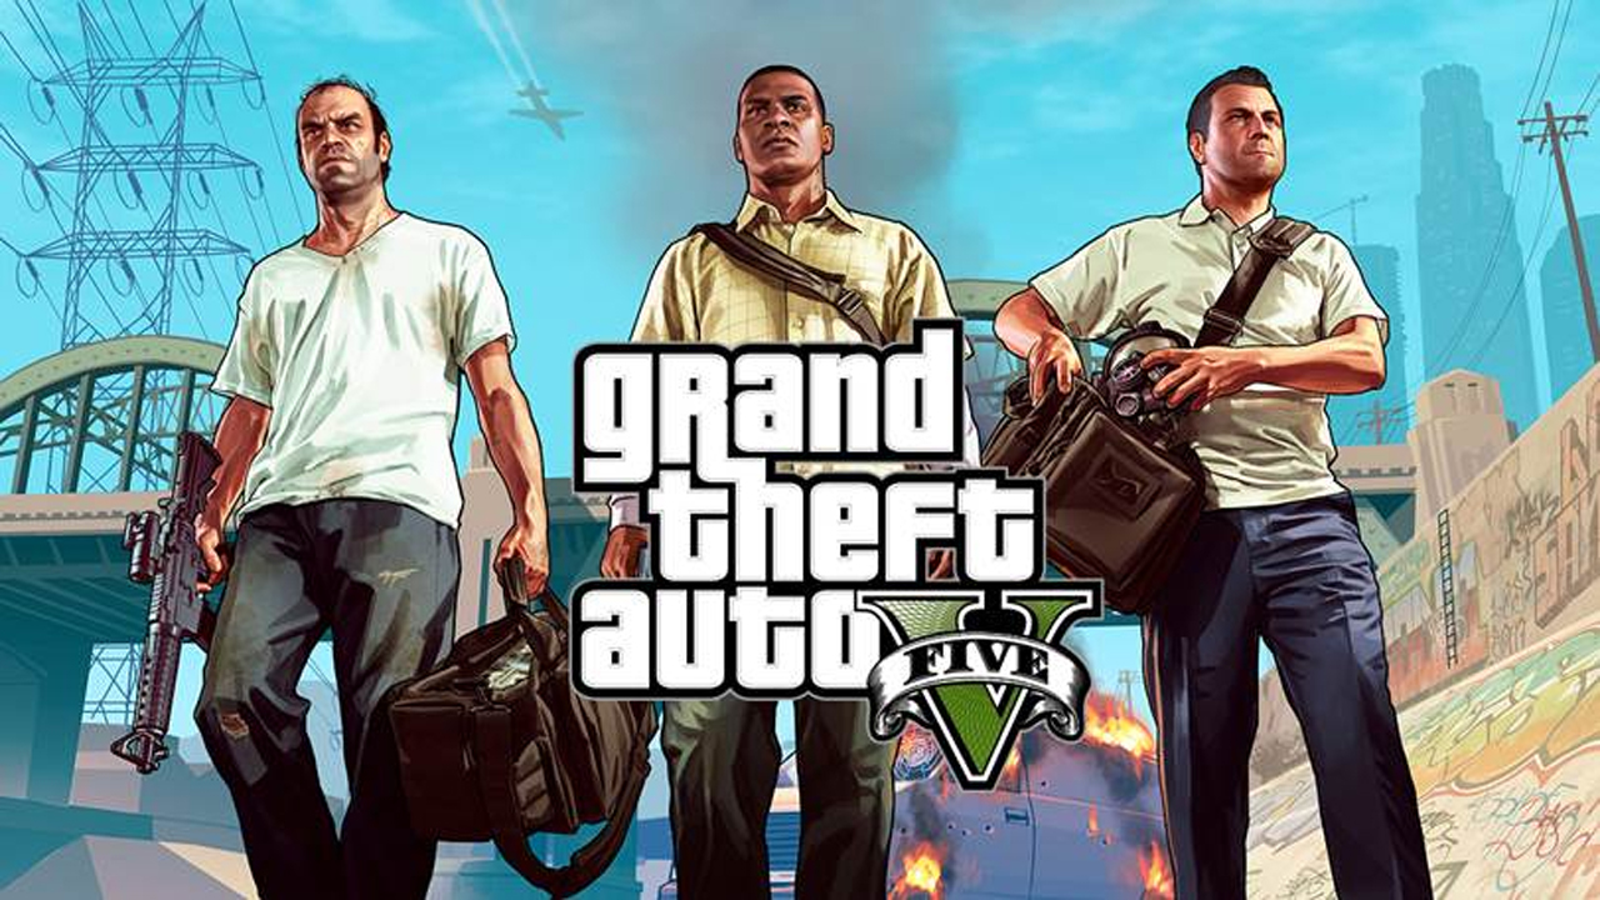 Grand Theft Auto drives off with top UK spot for third week